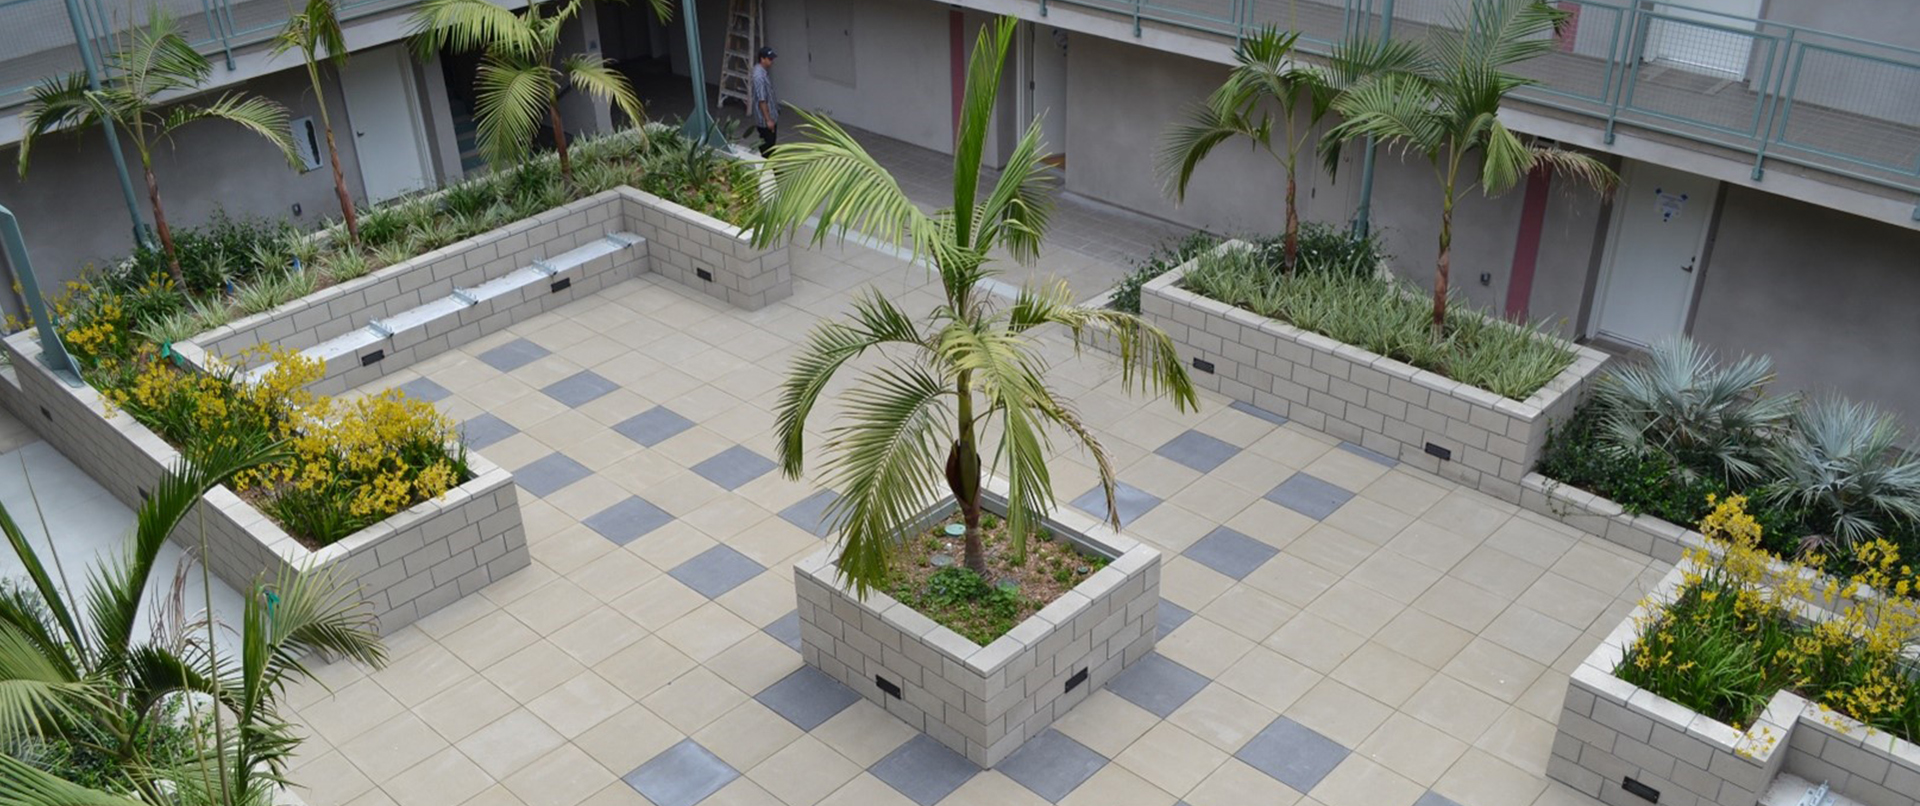 Aerial View Courtyard Terrace with Planters